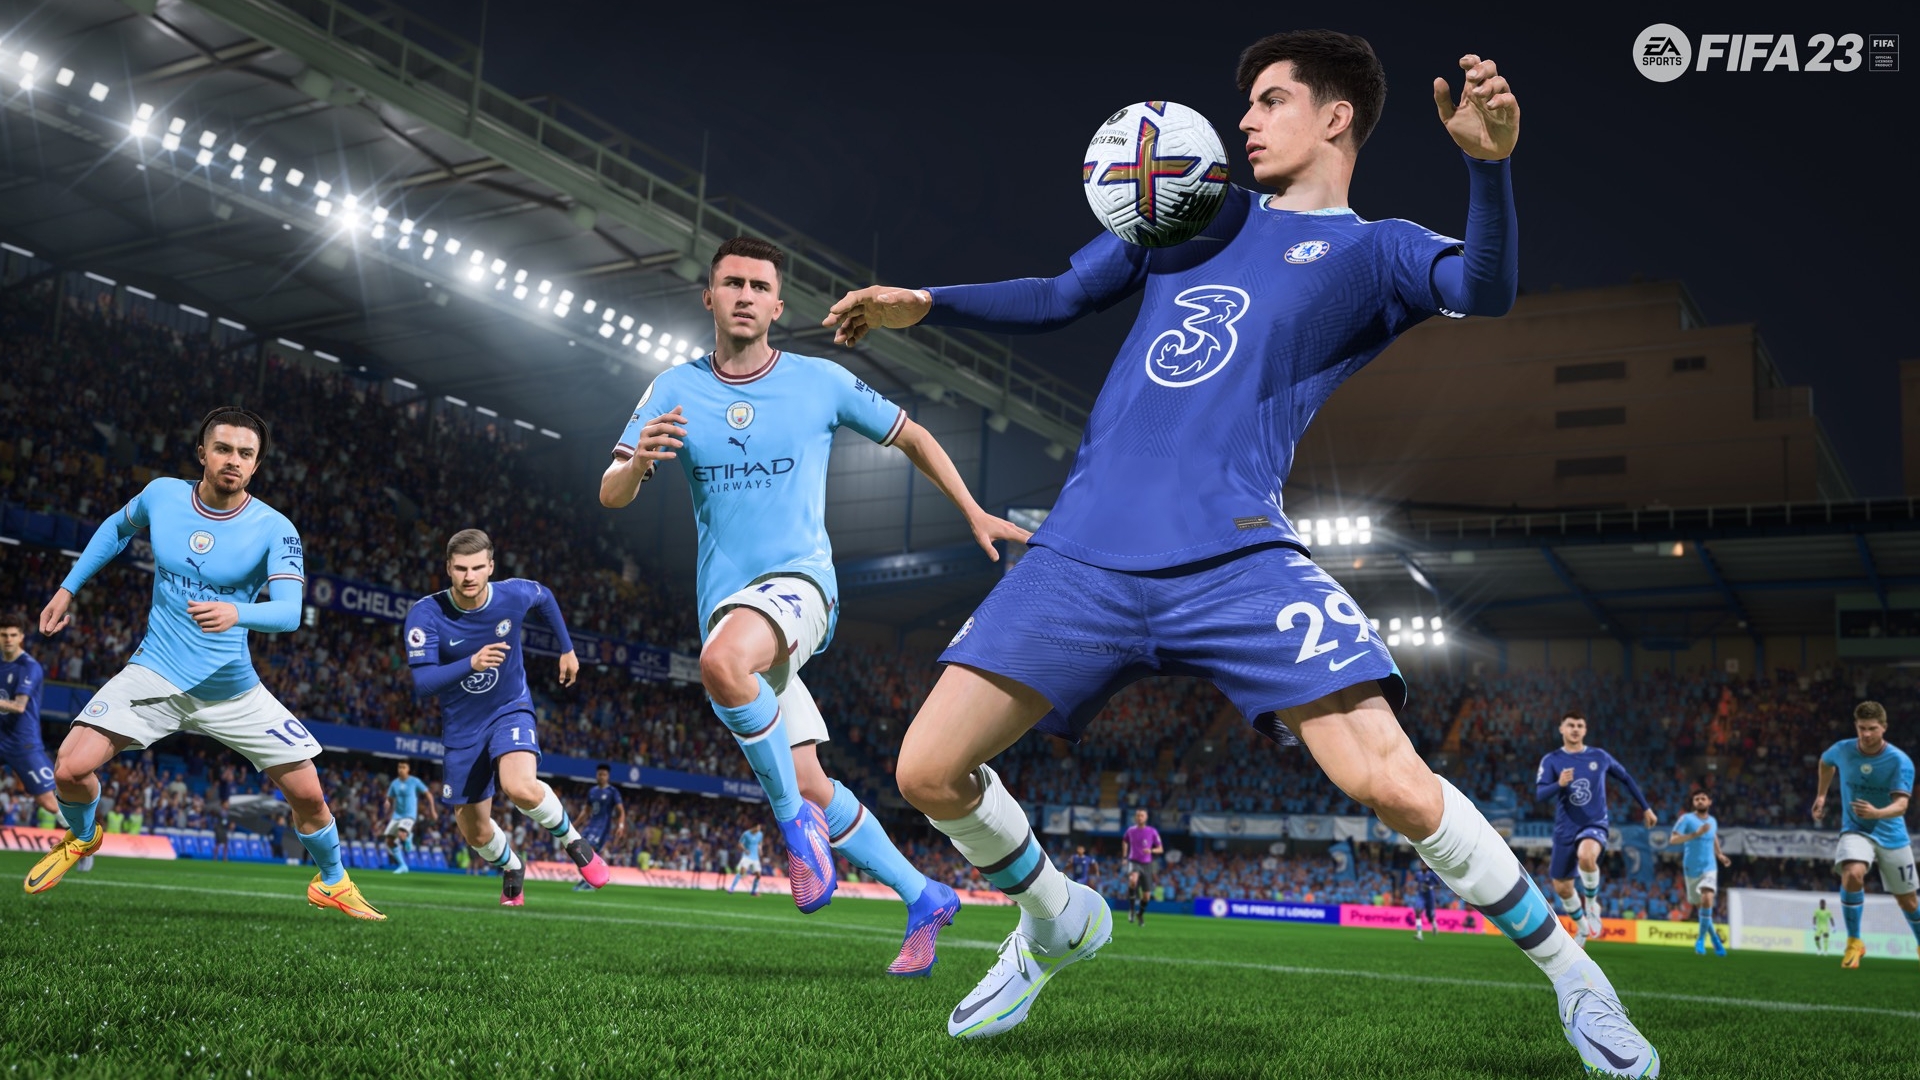 What time does the FIFA 23 web app release?